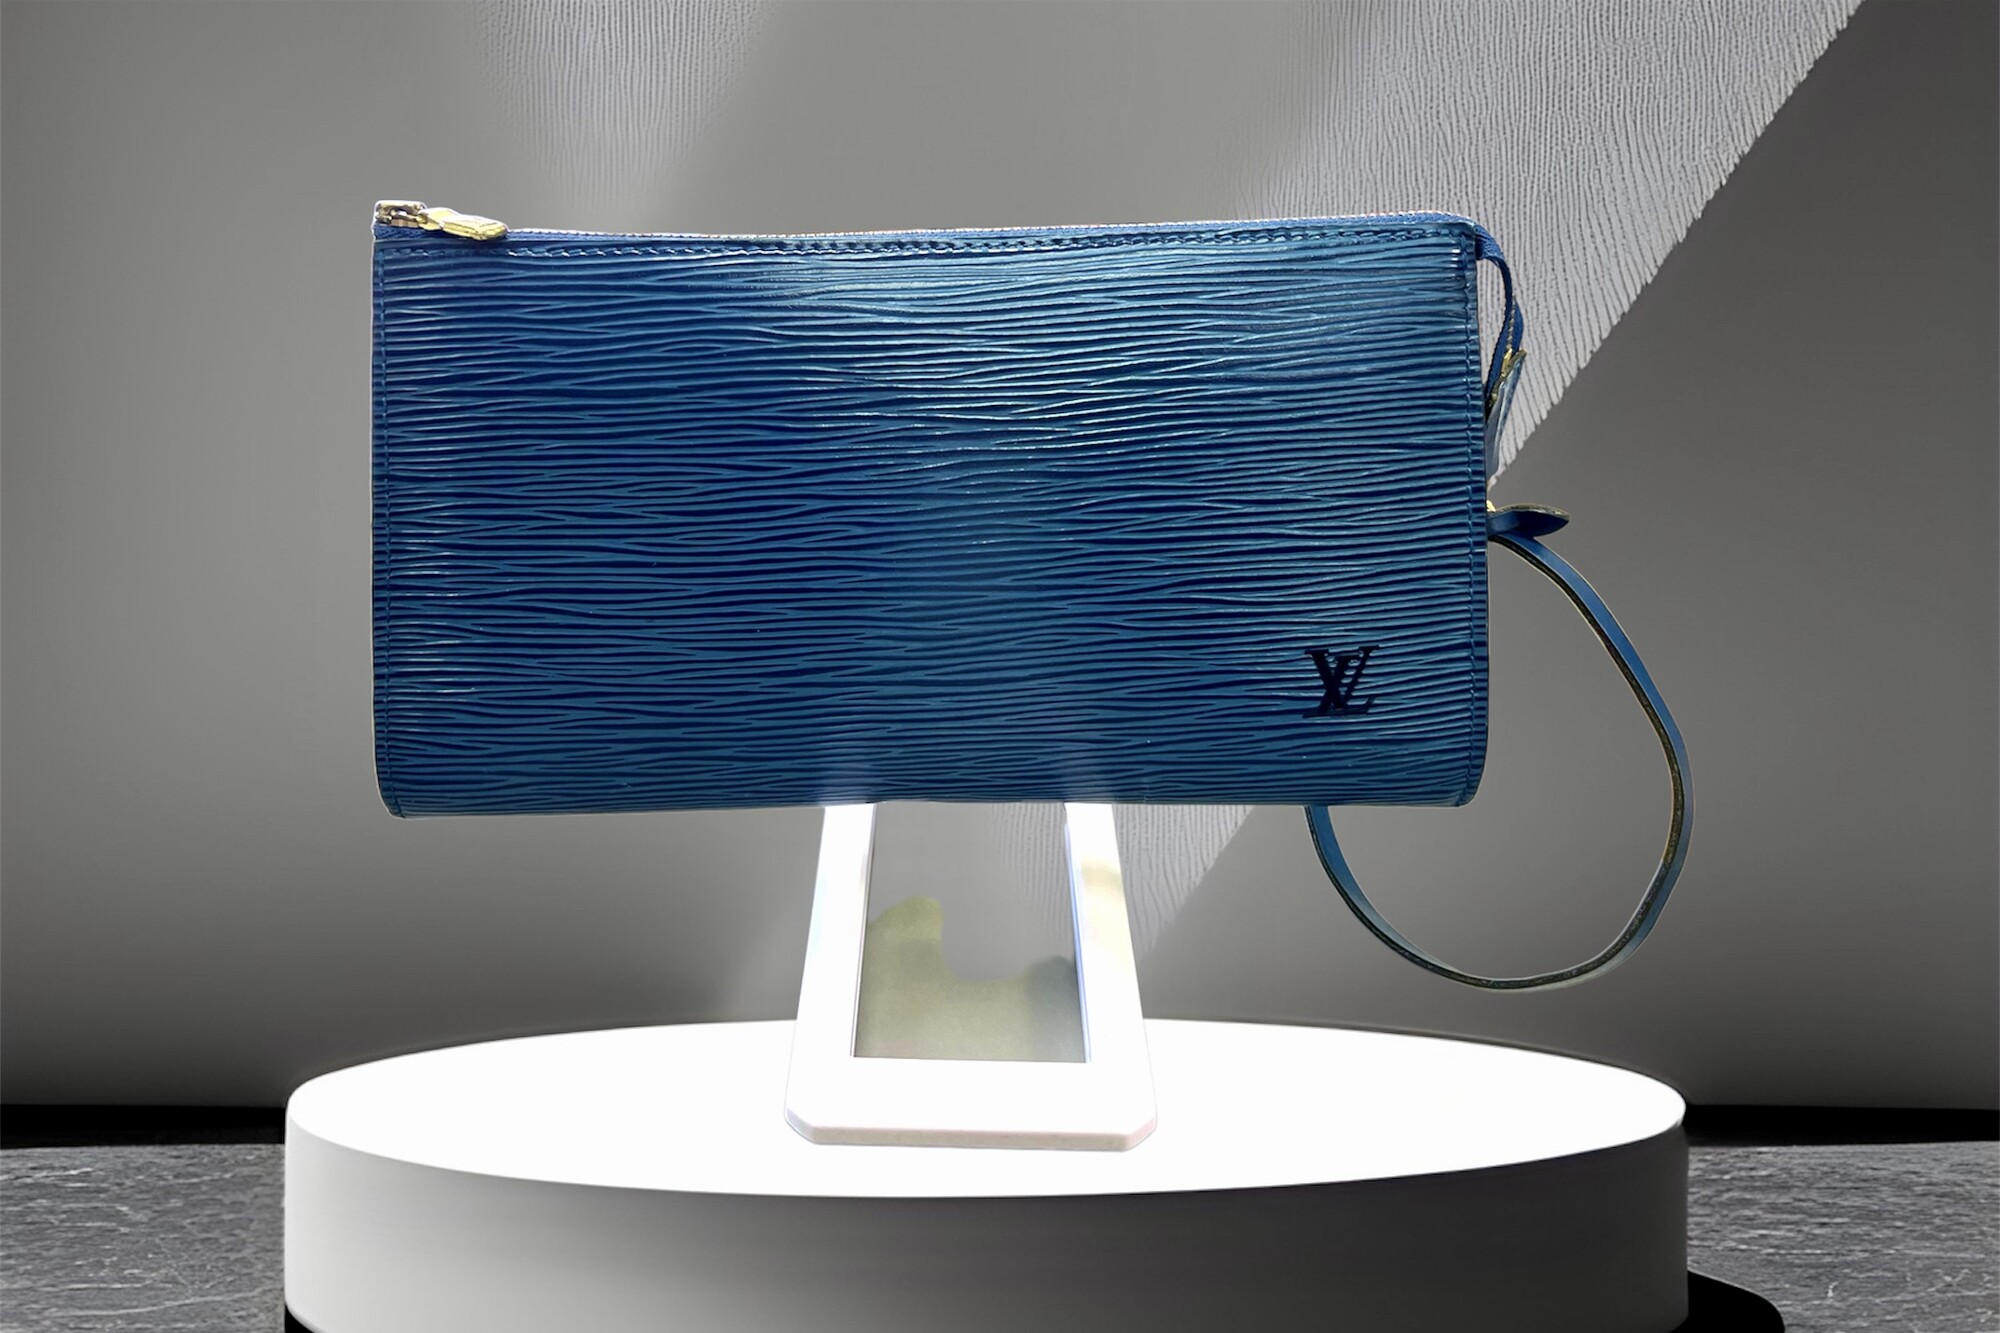 Louis Vuitton Blue Epi Leather Pochette With Logo Embossed On The Exterior, Blue Suede Lining, Gold-tone Hardware, Zipper Closure, Top Handle With A Hook (can Be Worn As A Wristlet)
Comes with CERTIFICATE OF AUTHENTICITY
Brand : Louis Vuitton
Country Of Origin : France
Type : Pochette, Pouch Epi leather
Color : Blue
Closure : Zipper
Size Hxwxd Cm : 11.5cm x 21.5cm x 2.5cm / 4.52'' x 8.46'' x 0.98'' Width Cm : 21.5 Depth Cm : 2.5
Handle Drop Cm : 14.00cm / 5.51''
Serial Number : AR1915 (date: 11 of 1995)
Condition : Used (very good - VINTAGE).   A few traces of usage
This bag is available in similar condition on Mercari for $800.00 and vestiairecollective for $762.00